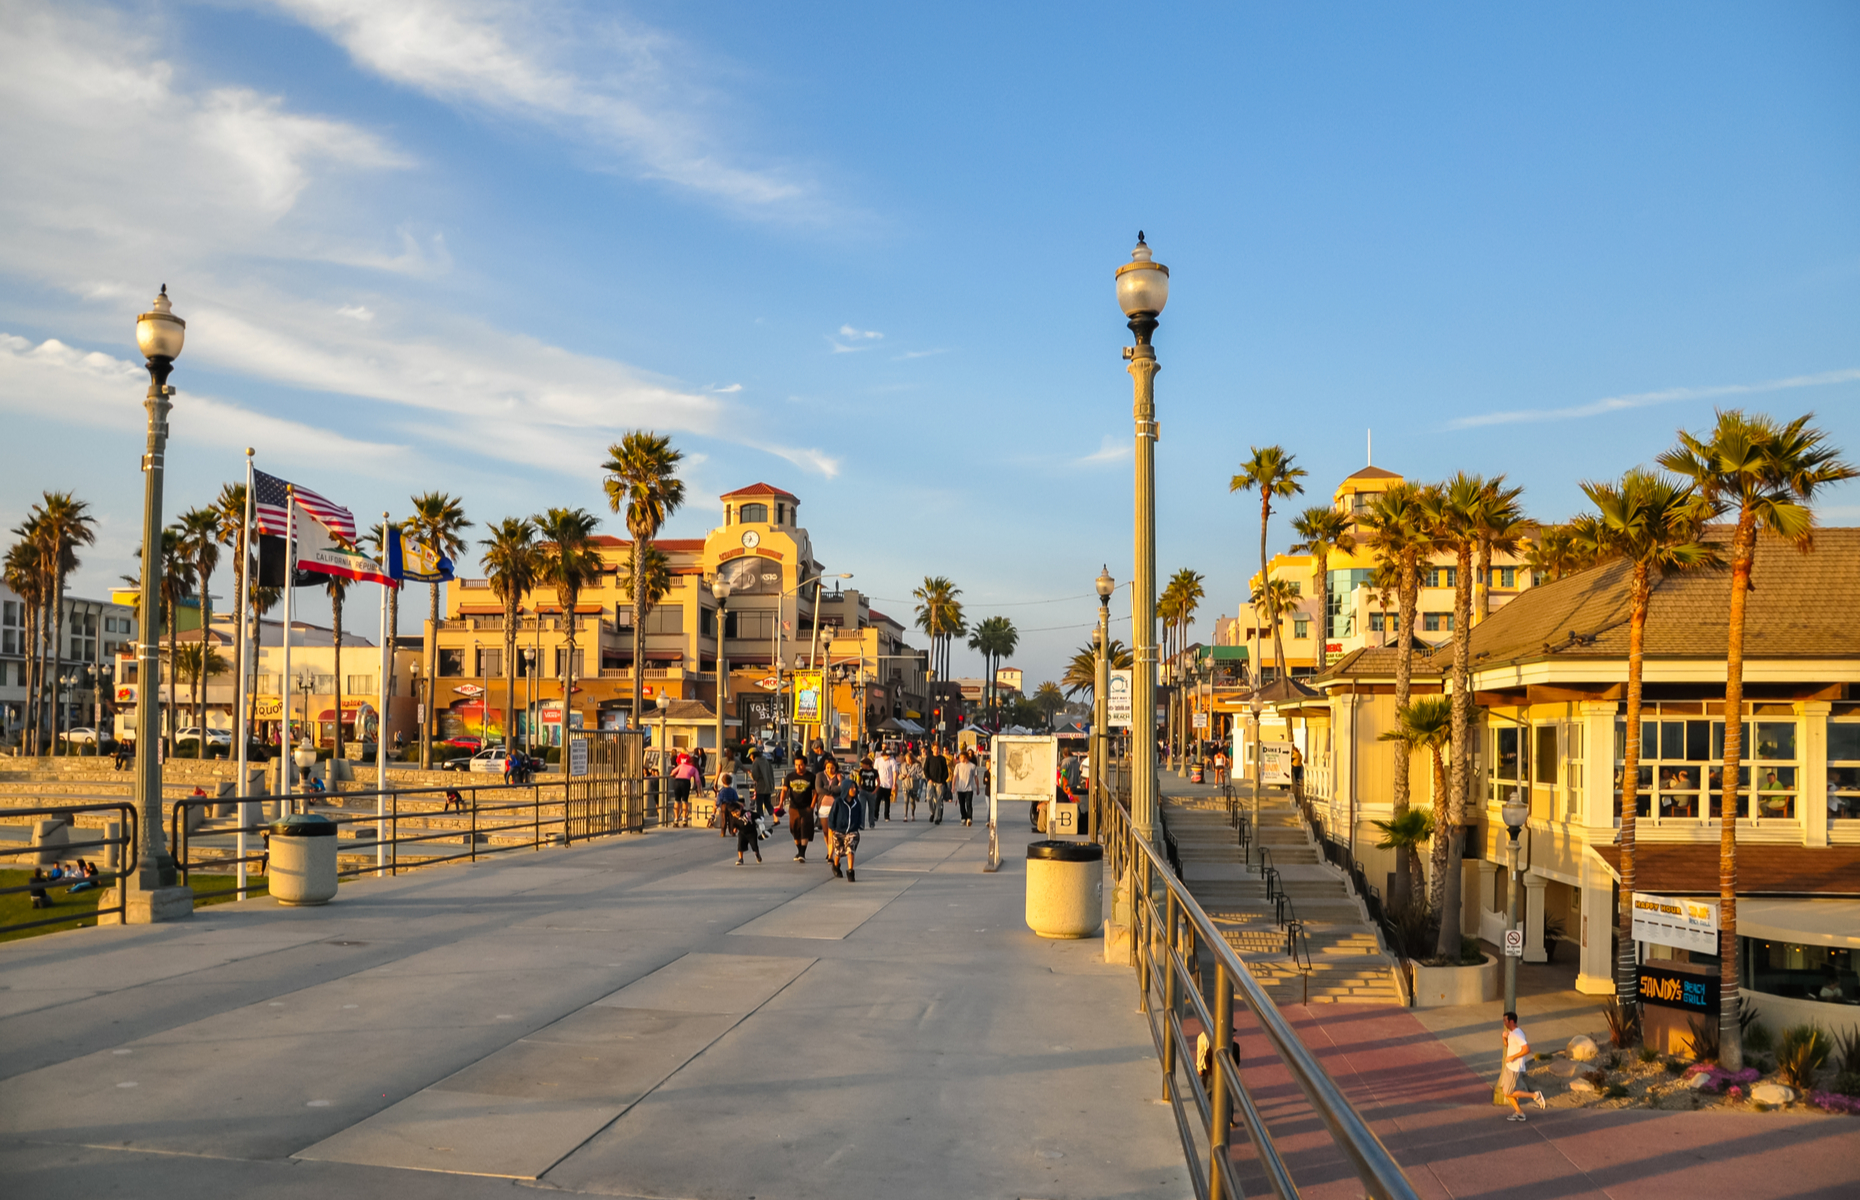 6 essential things to do in California's Huntington Beach